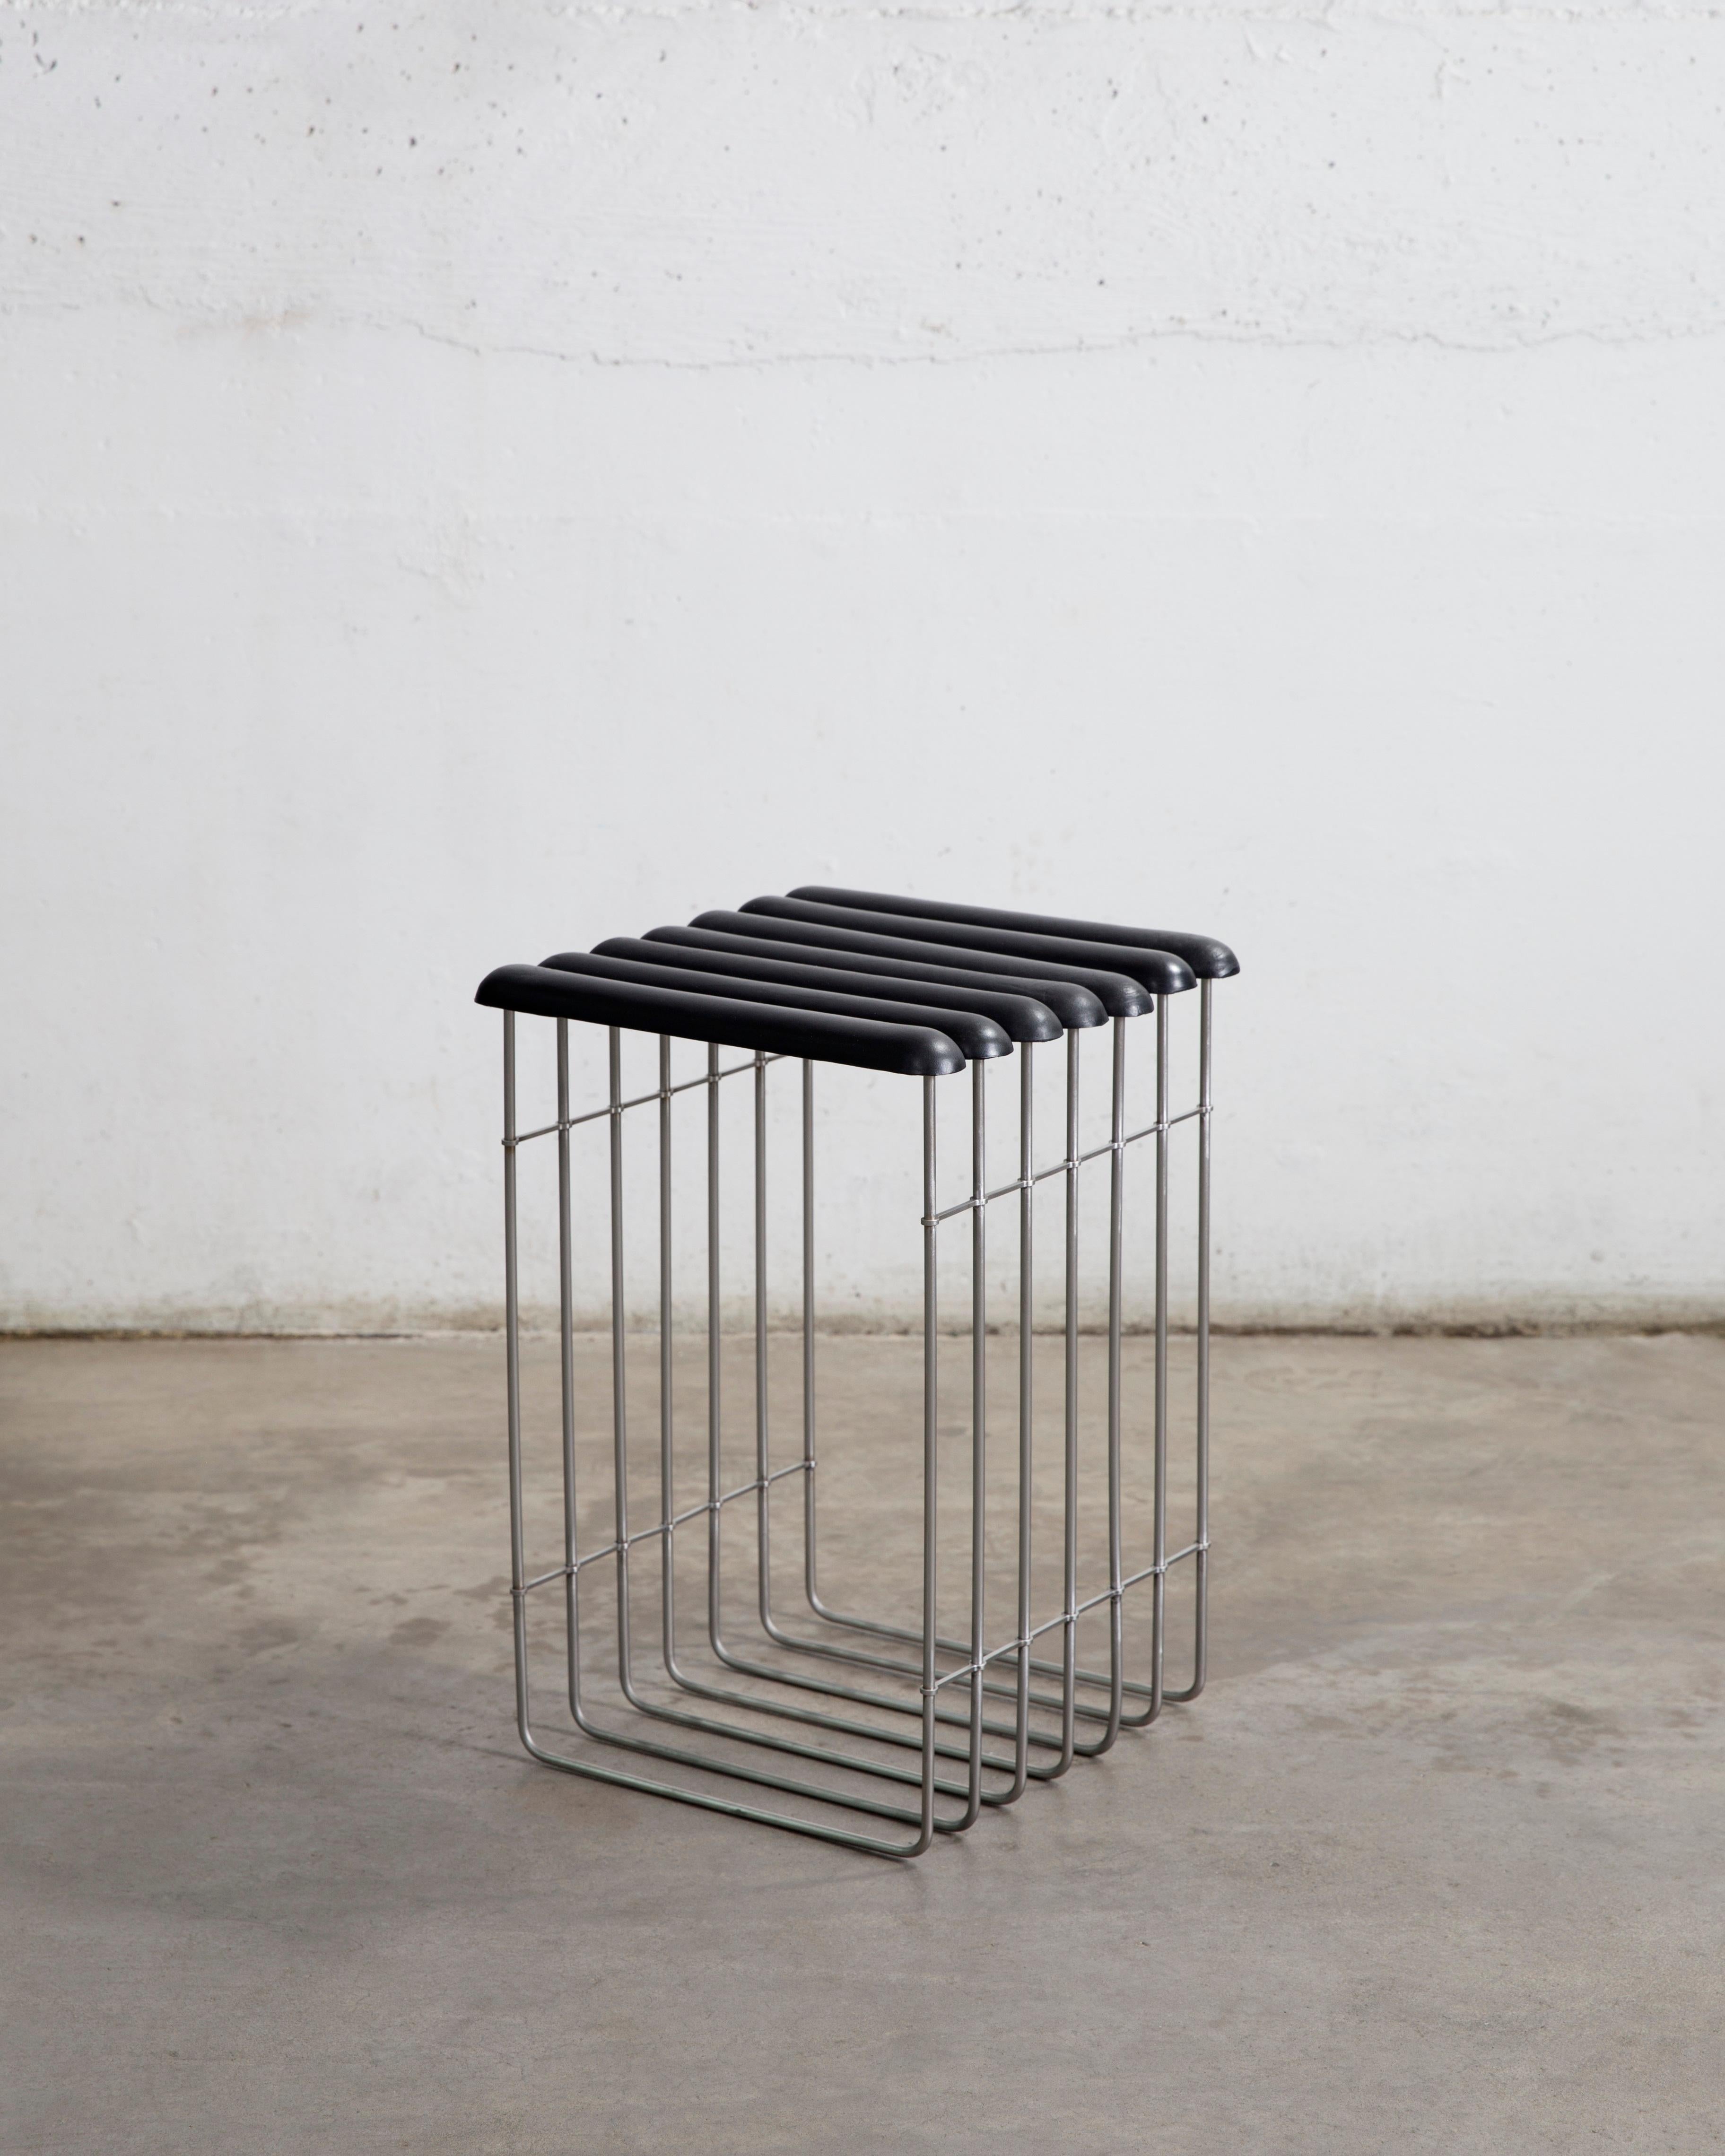 Stool III by Gentner Design
Dimensions: D 35.5 x W 35.5 x H 45.7 cm
Materials: stainless steel, leather

Formed leather supported by machined aluminum, raised up by formed stainless steel.

Gentner Design
Rooted in a language of sculpture,